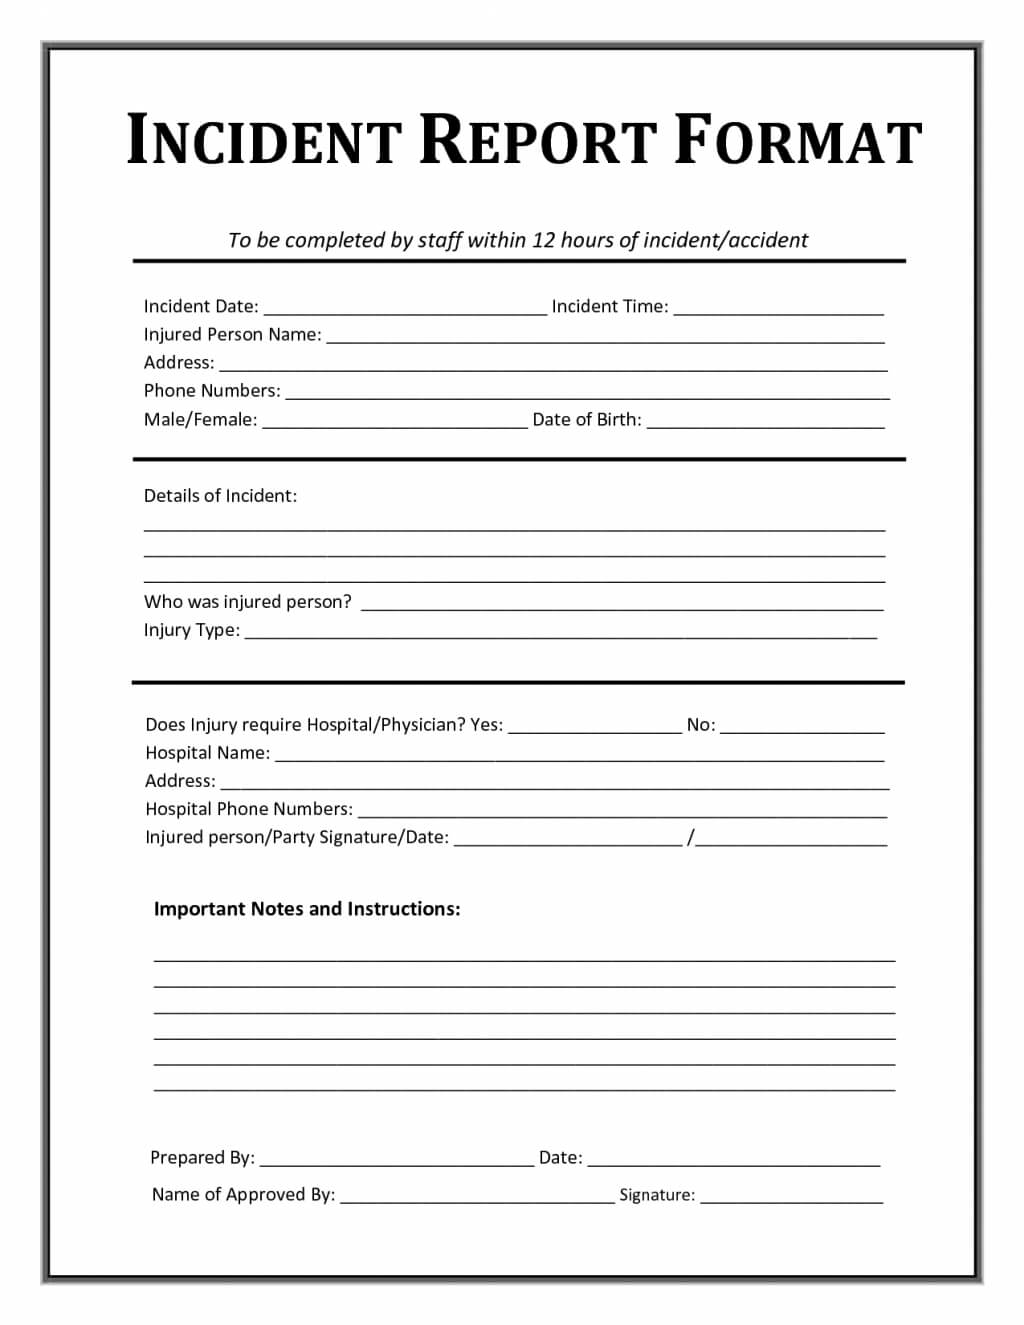 Incident Report Form Template Microsoft Excel Templates For Hazard Incident Report Form Template